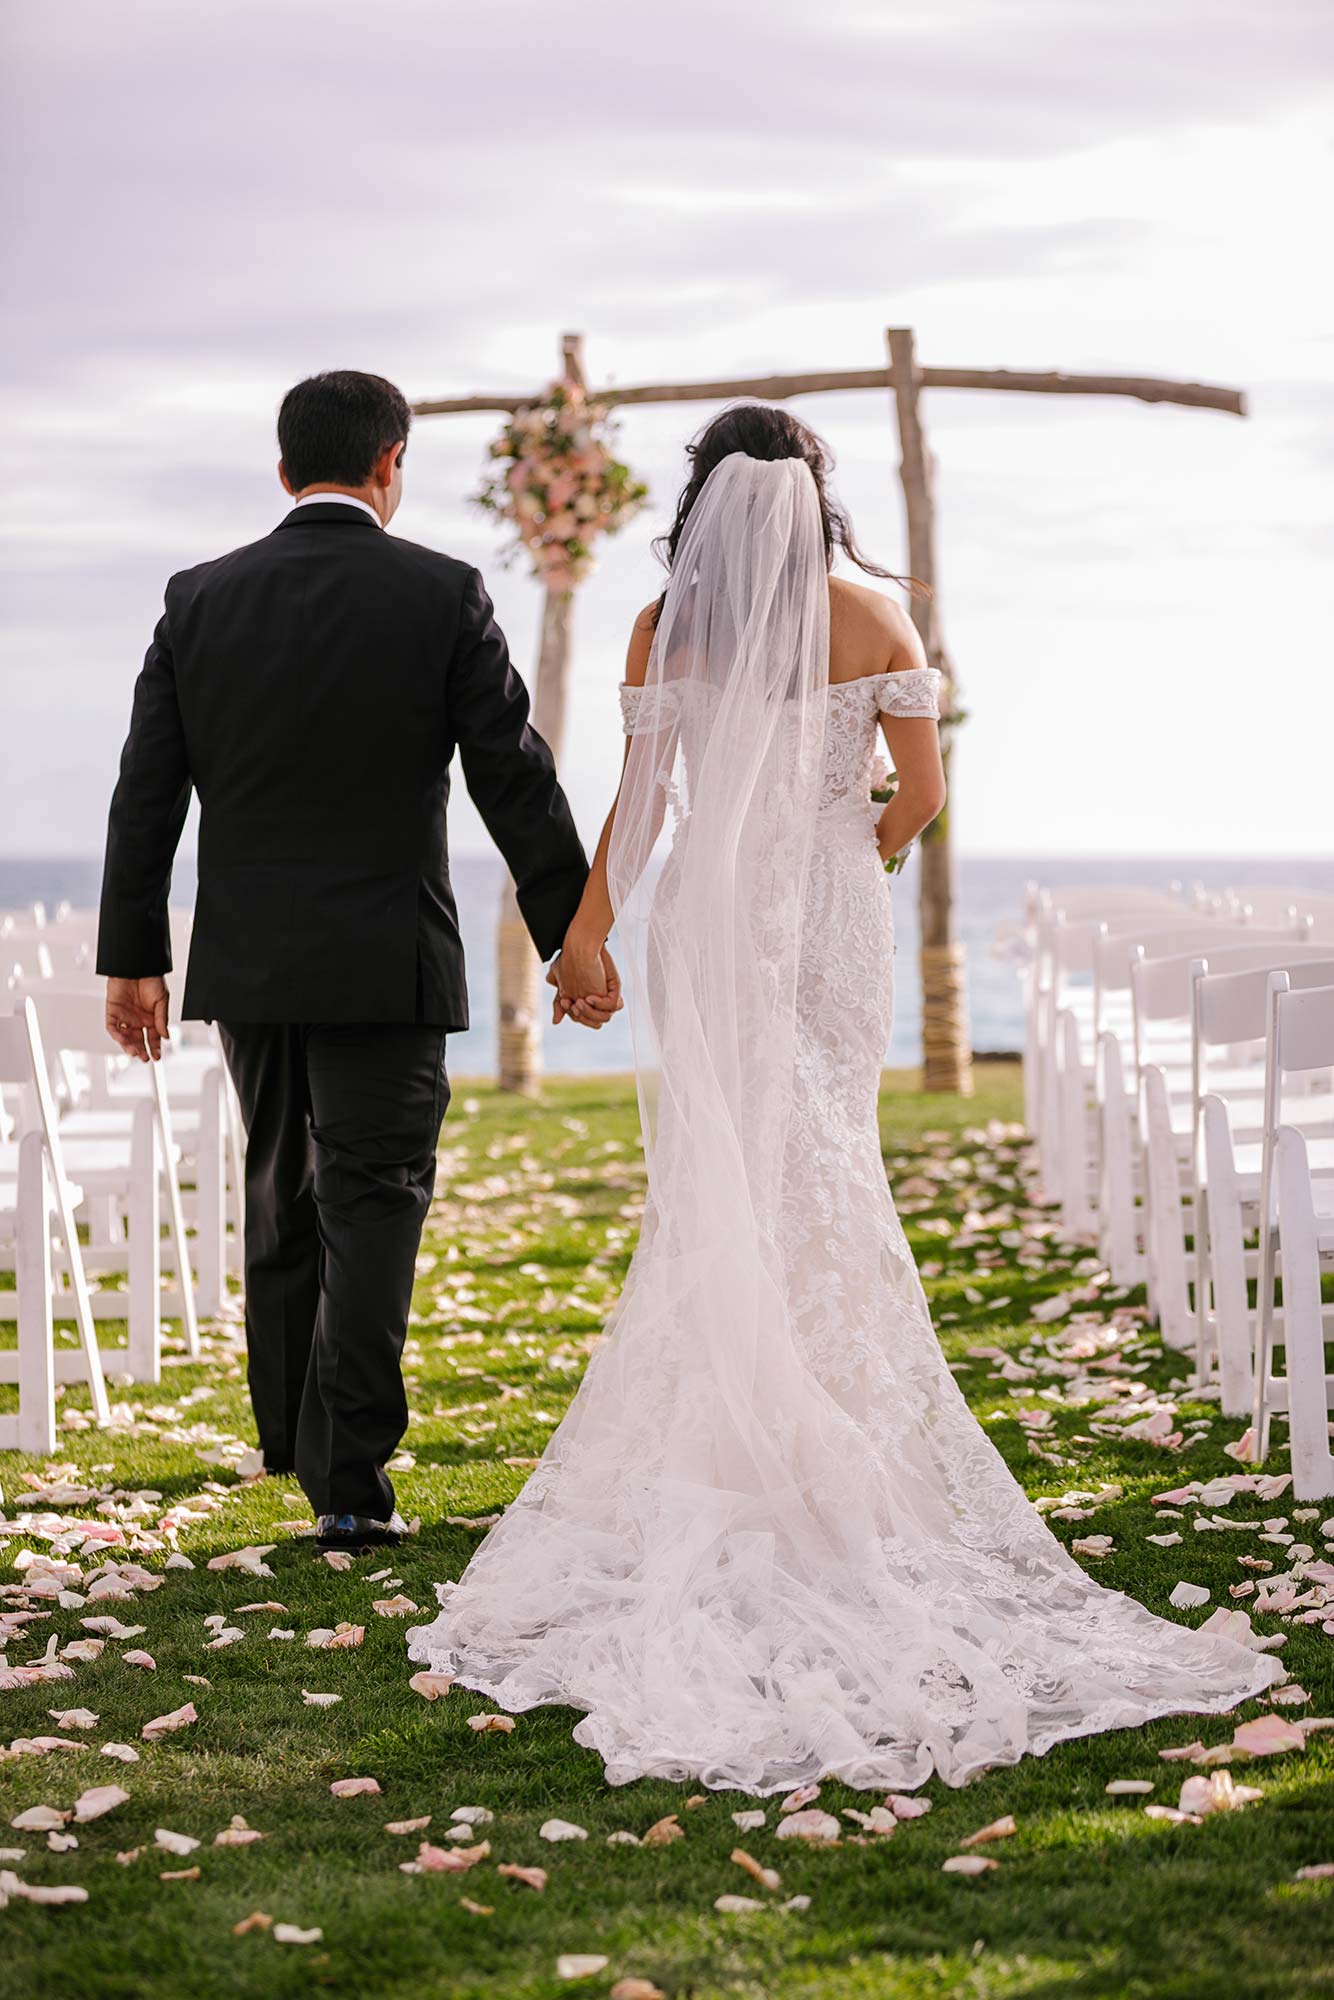 image of bridal couple walking after getting married